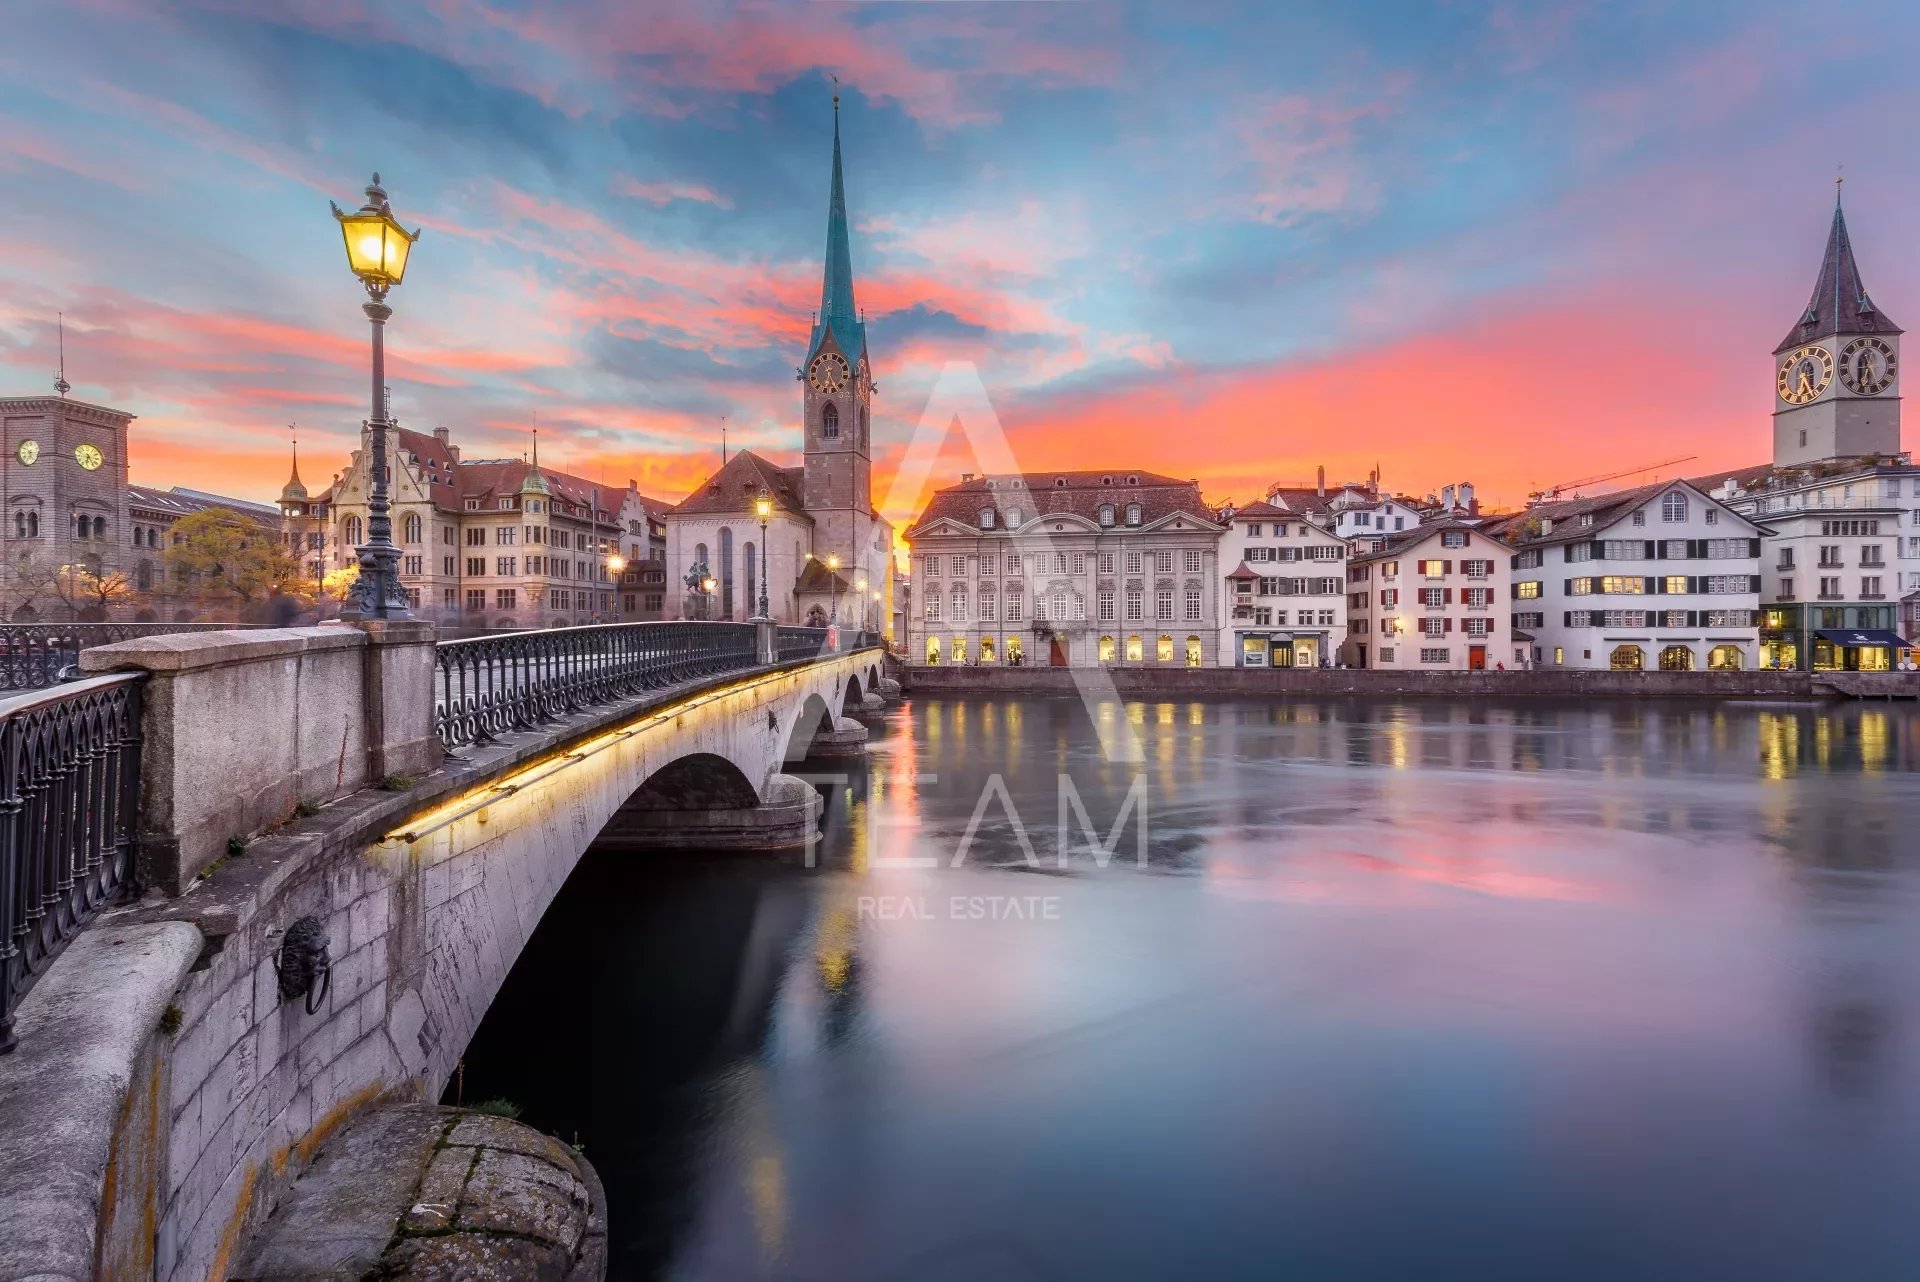 capital,zurich,city,dusk,church,tourism,skyline,local,limmat,street,cityscape,national,place,landmark,europe,tower,sky,famous,reflection,town,old,switzerland,dramatic,water,sunset,bridge,river,travel